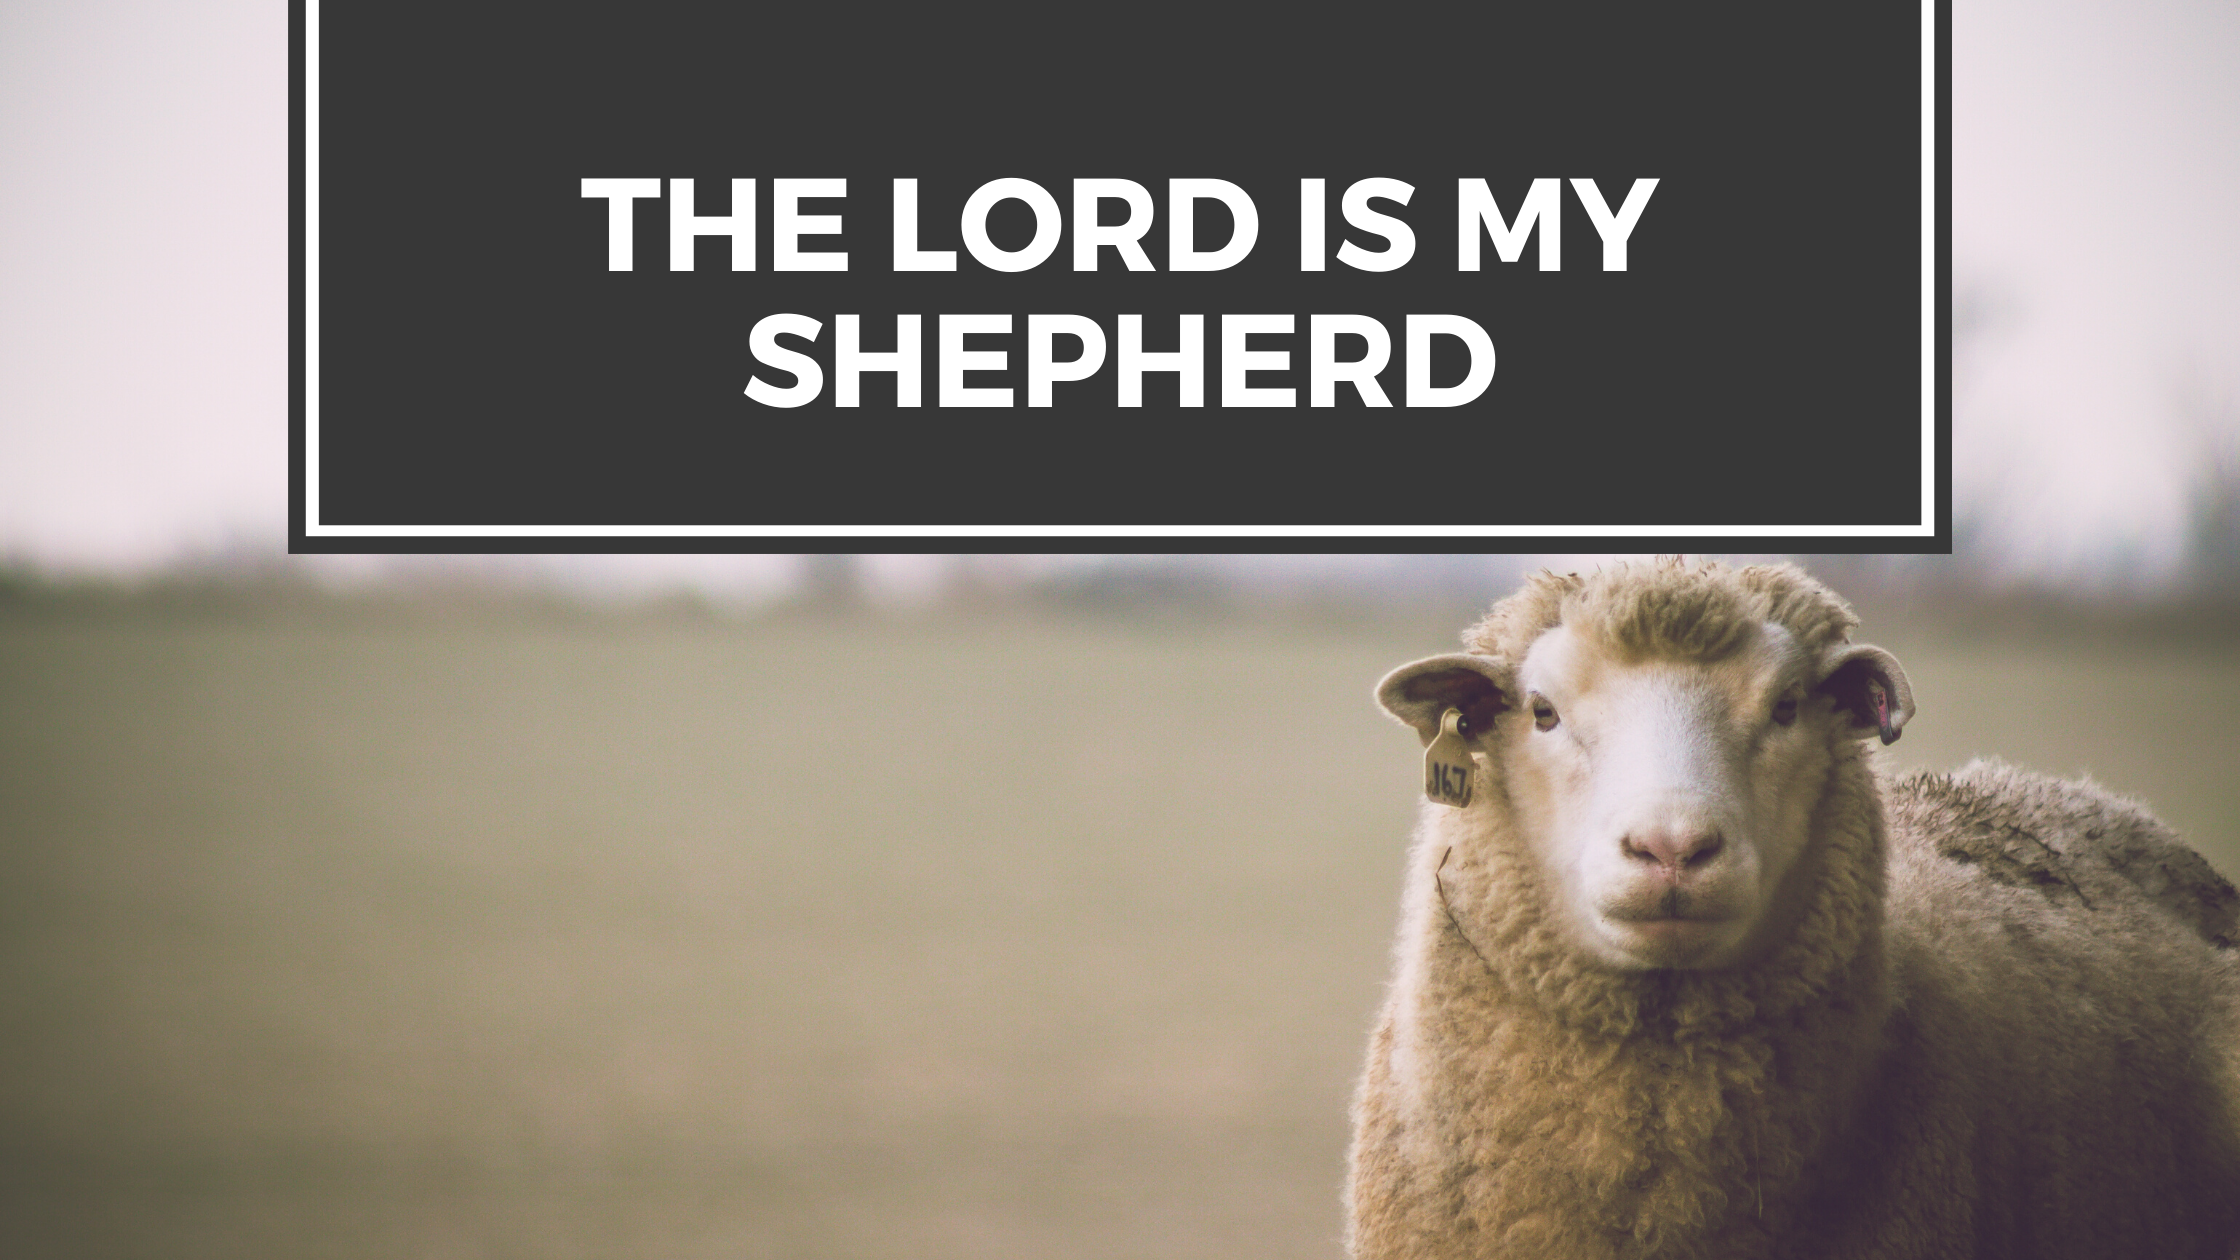 The Lord is My Shepherd blog title with sheep background